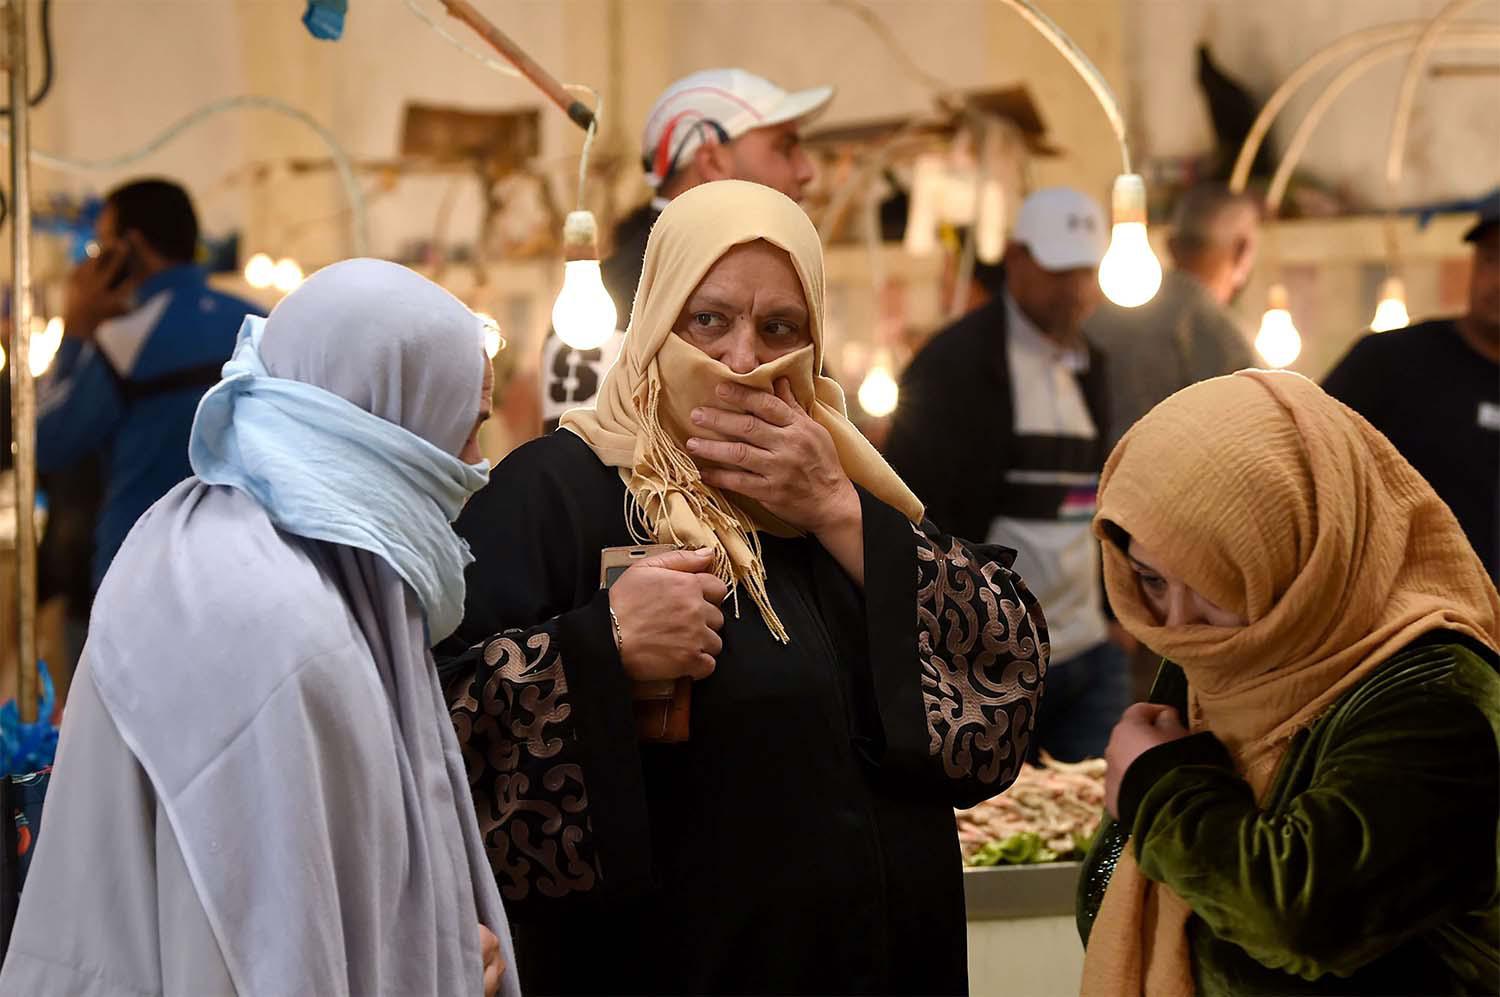 Tunisian women, covering their faces, walk past stalls in a central market in the capital Tunis